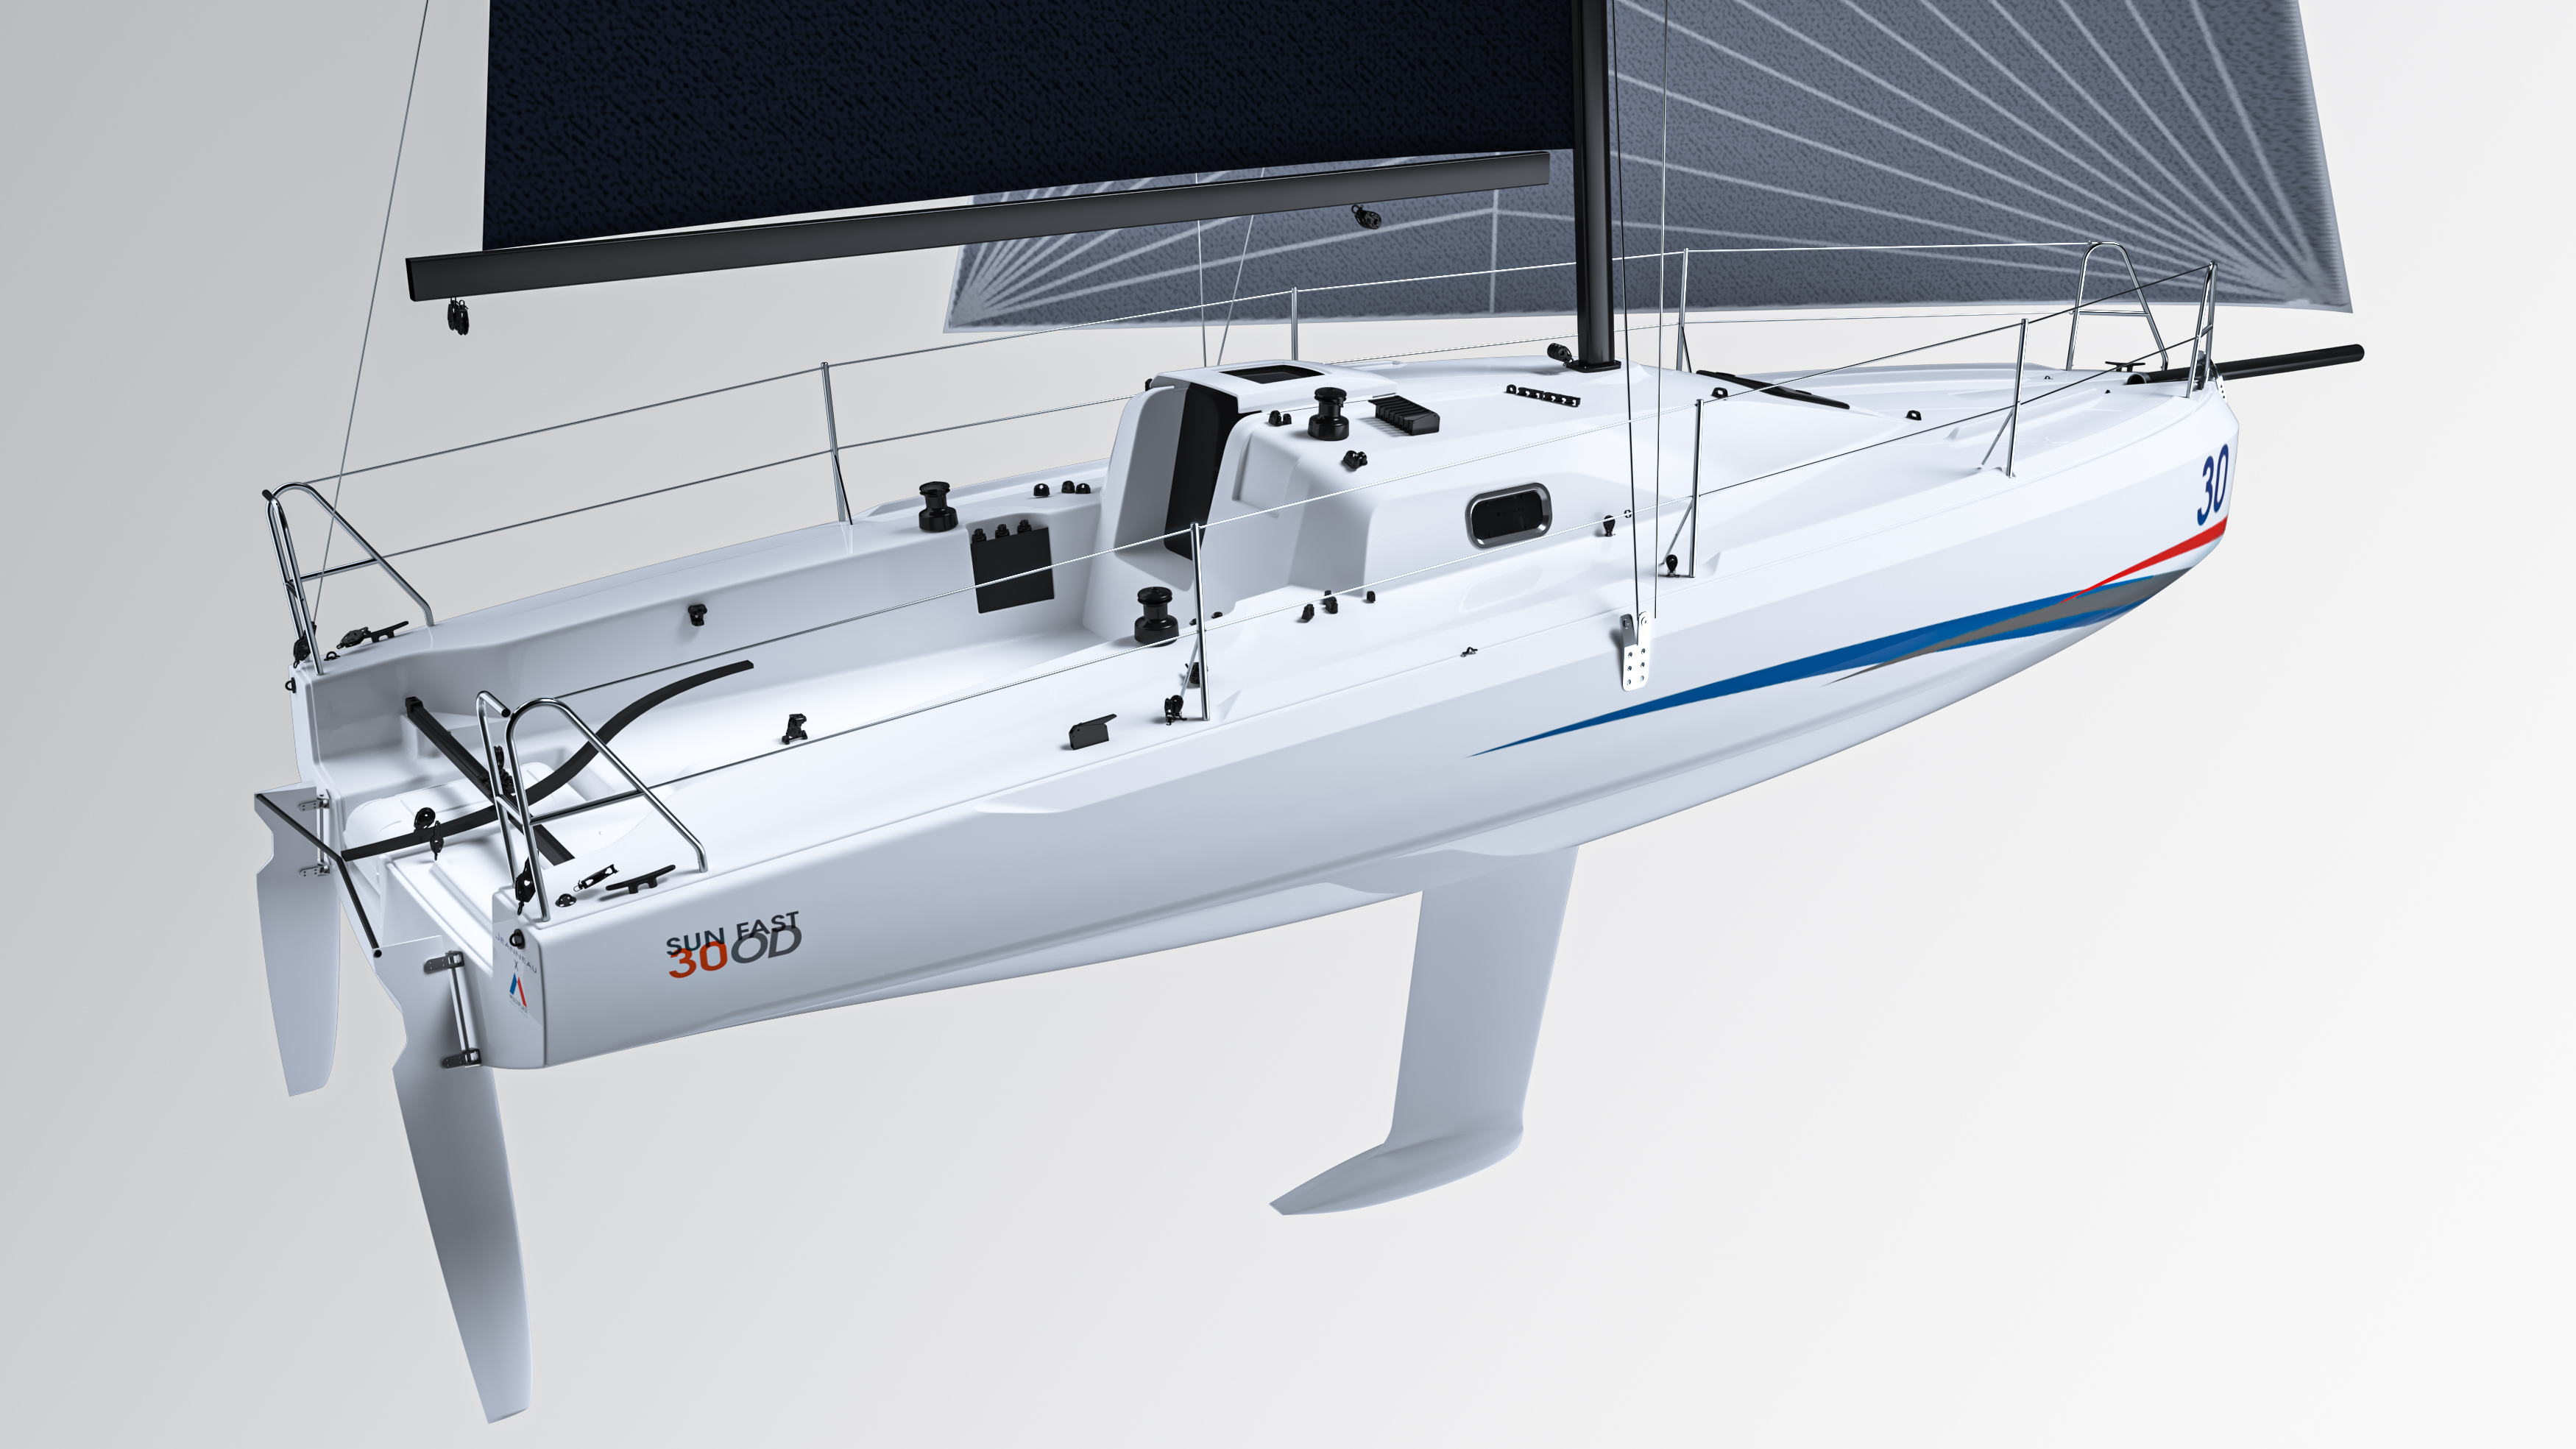 Sun Fast 30 One Design concept drawing, view from stern